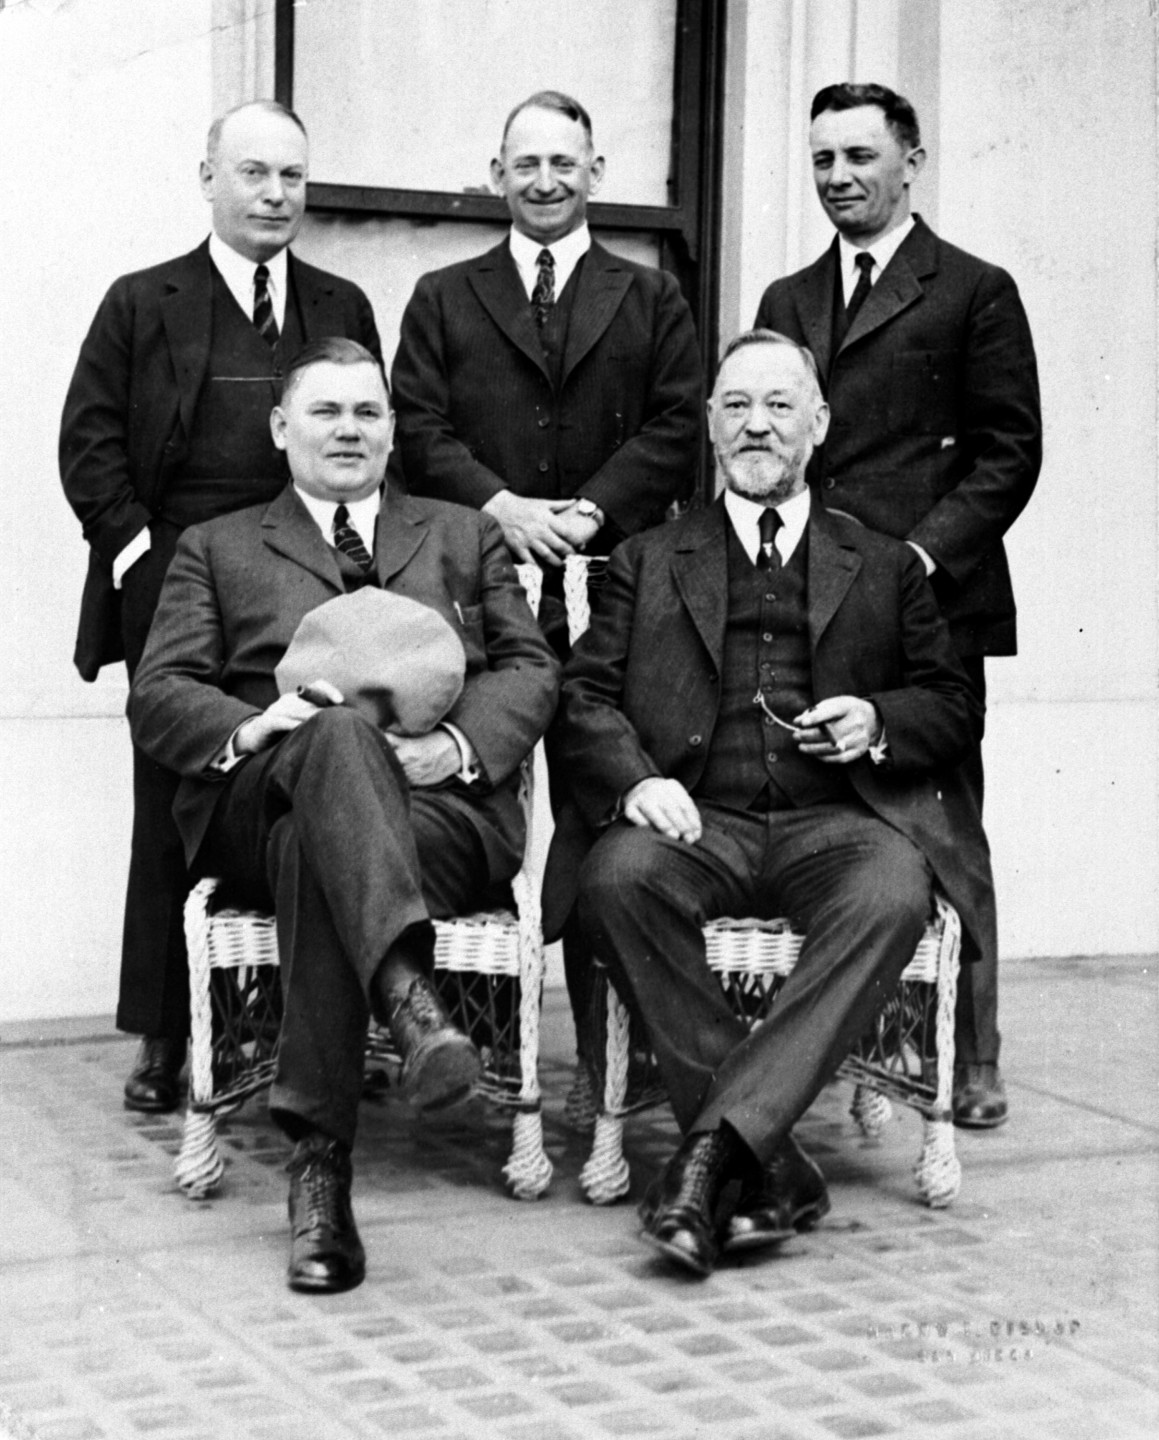 In April 1924, Dr. Harry met with officials from the St. Louis Zoo and the Nashville Zoo and formed the National Association of Zoological Executives, an association that could exchange information, trade animals, and assist one another with importations. This photo was taken with Dr. Harry and the St. Louis officials at the Hotel del Coronado, where the meeting took place. Top, left to right: A.D. Luchrman, St. Louis Zoo; Harry M. Wegeforth, San Diego Zoo; George P. Vierheller, St. Louis Zoo. Seated, left to right: Fred W. Pape, St. Louis Zoo; Frank Schwartz, St. Louis Zoo.
In October 1924, the organization added aquariums to the membership and changed its name to the American Association of Zoological Parks and Aquariums.